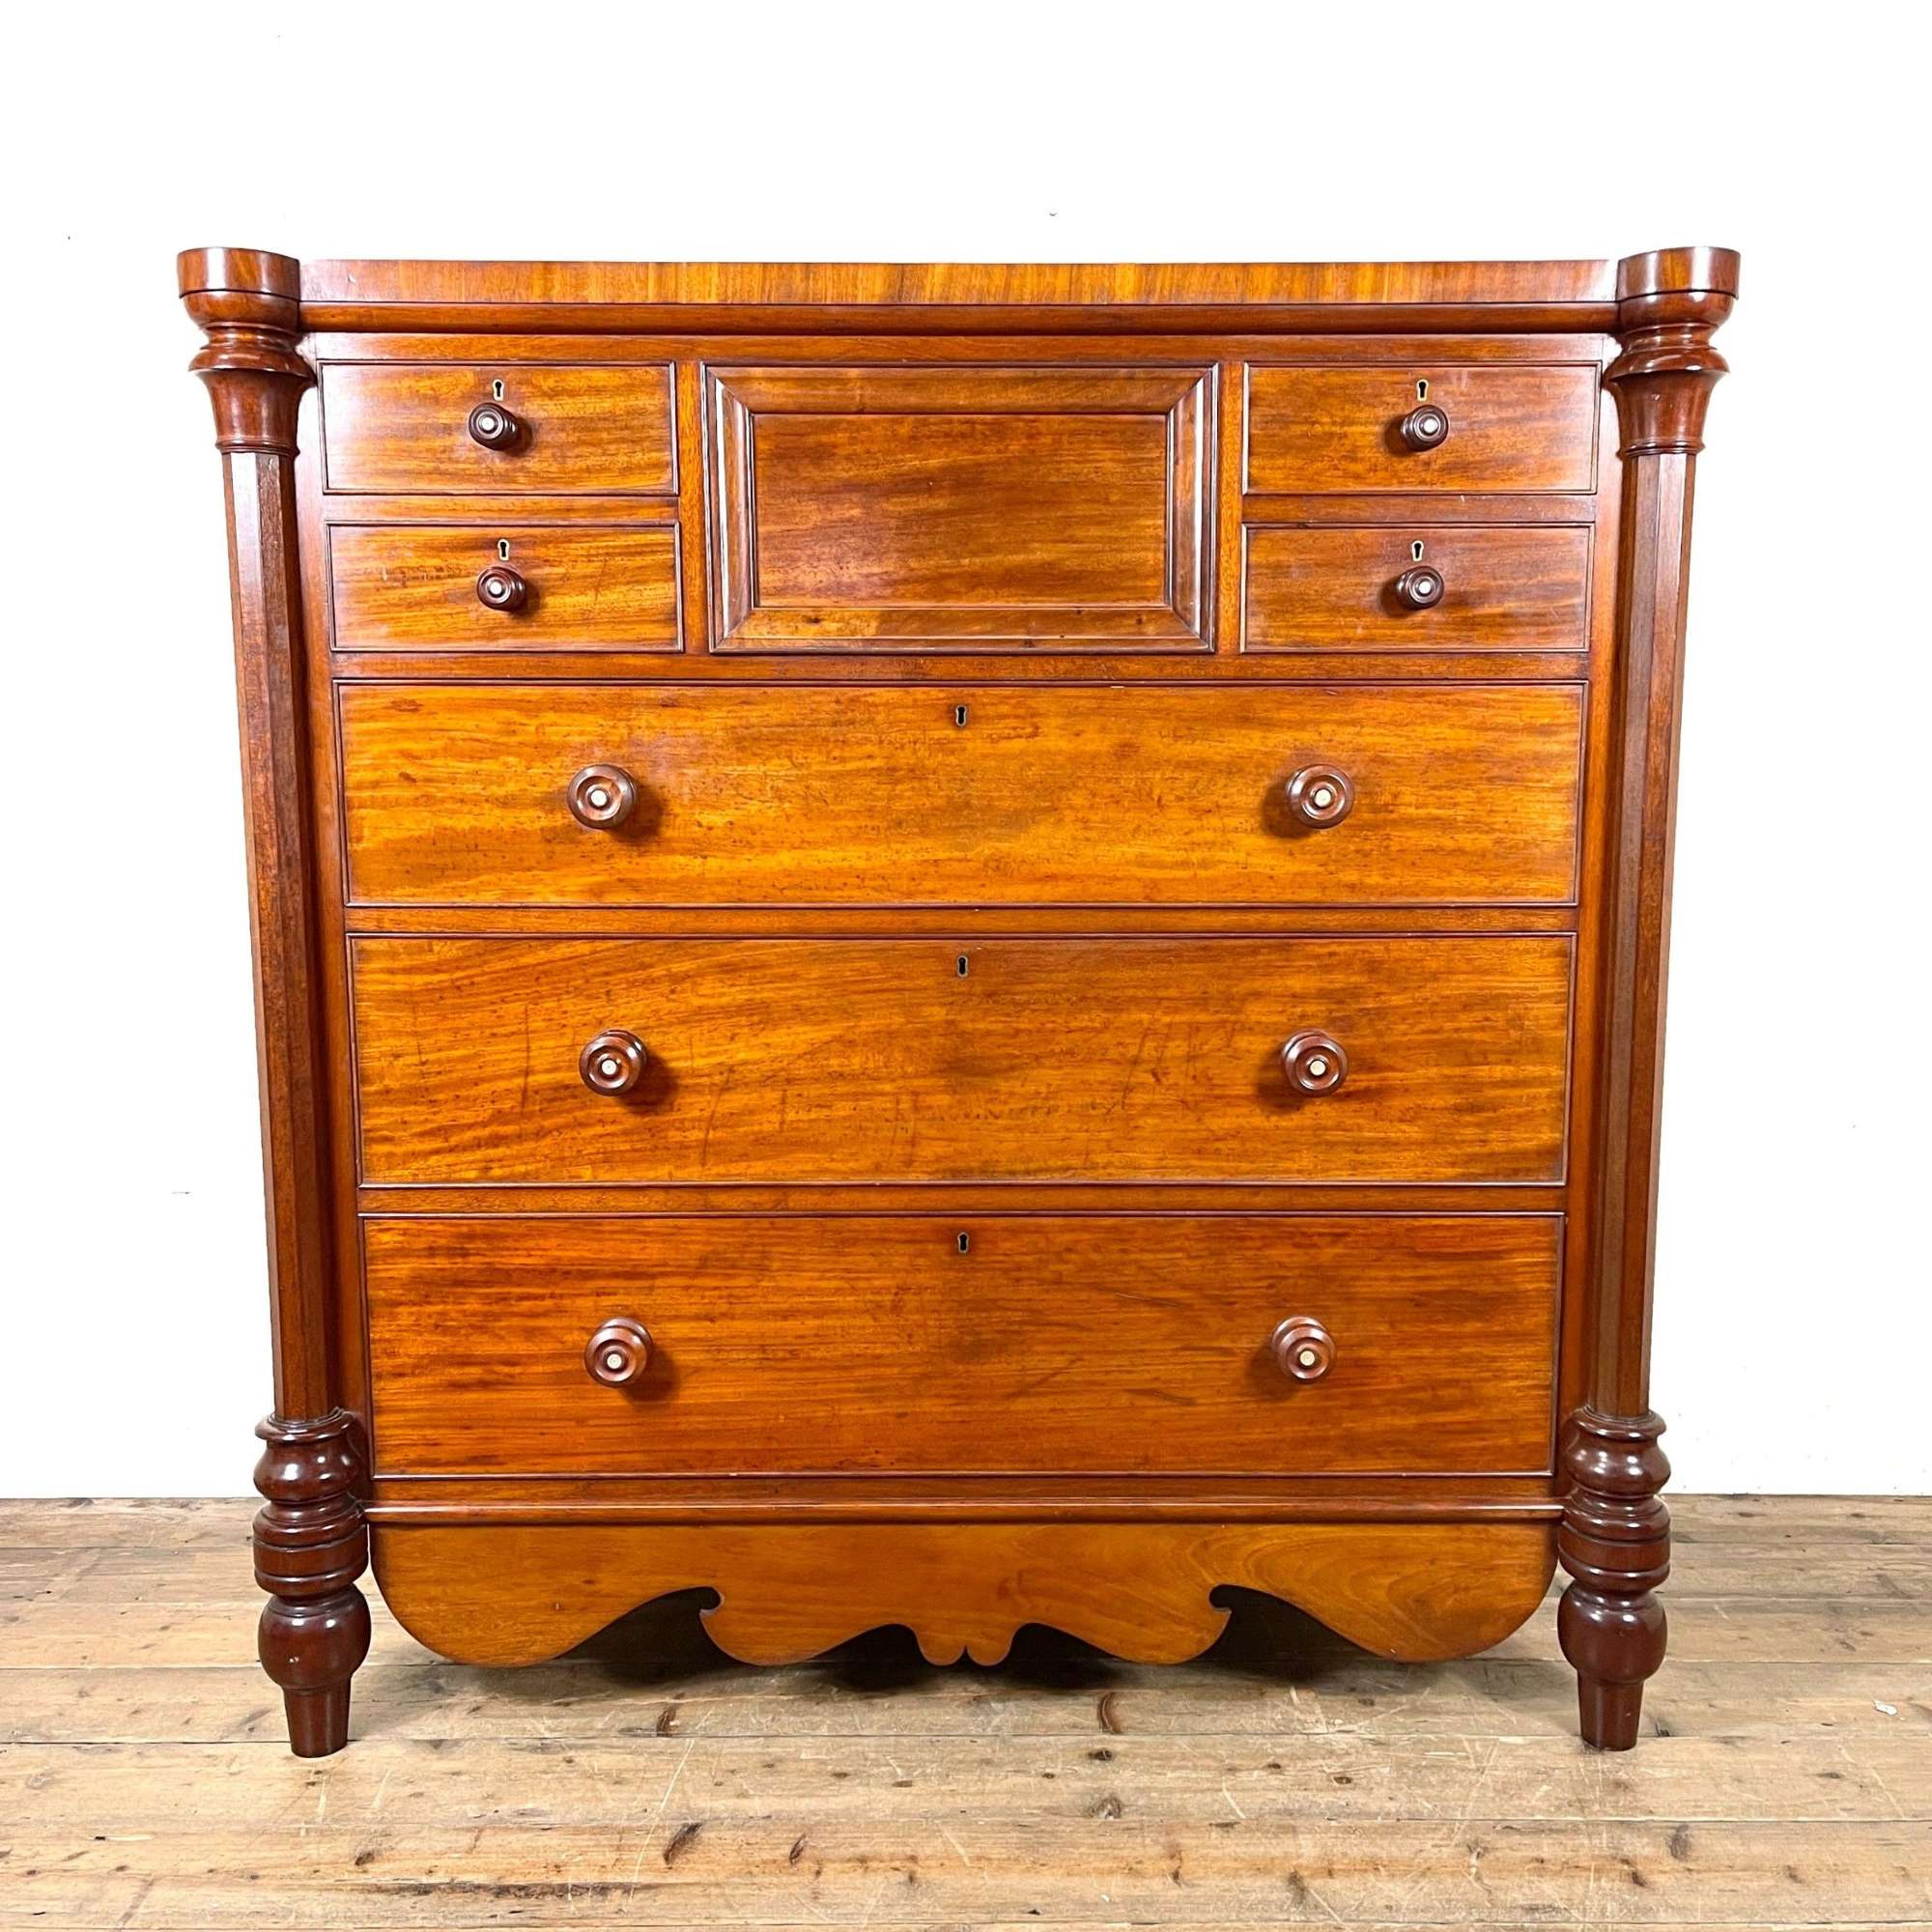 Antique Victorian Mahogany Chest Of Drawers